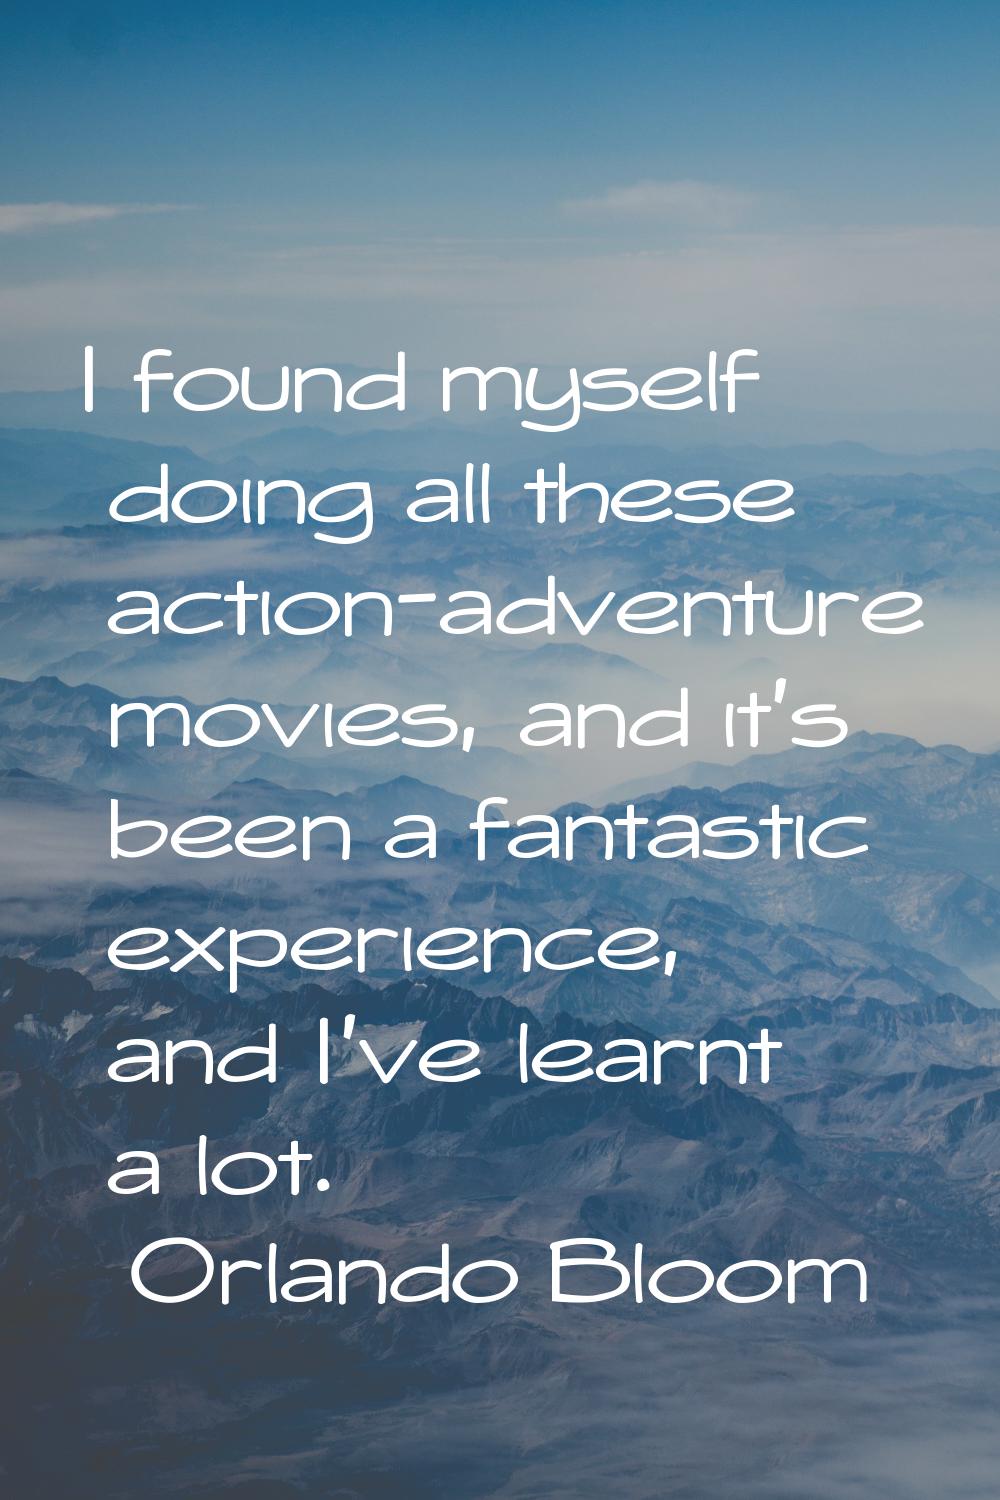 I found myself doing all these action-adventure movies, and it's been a fantastic experience, and I